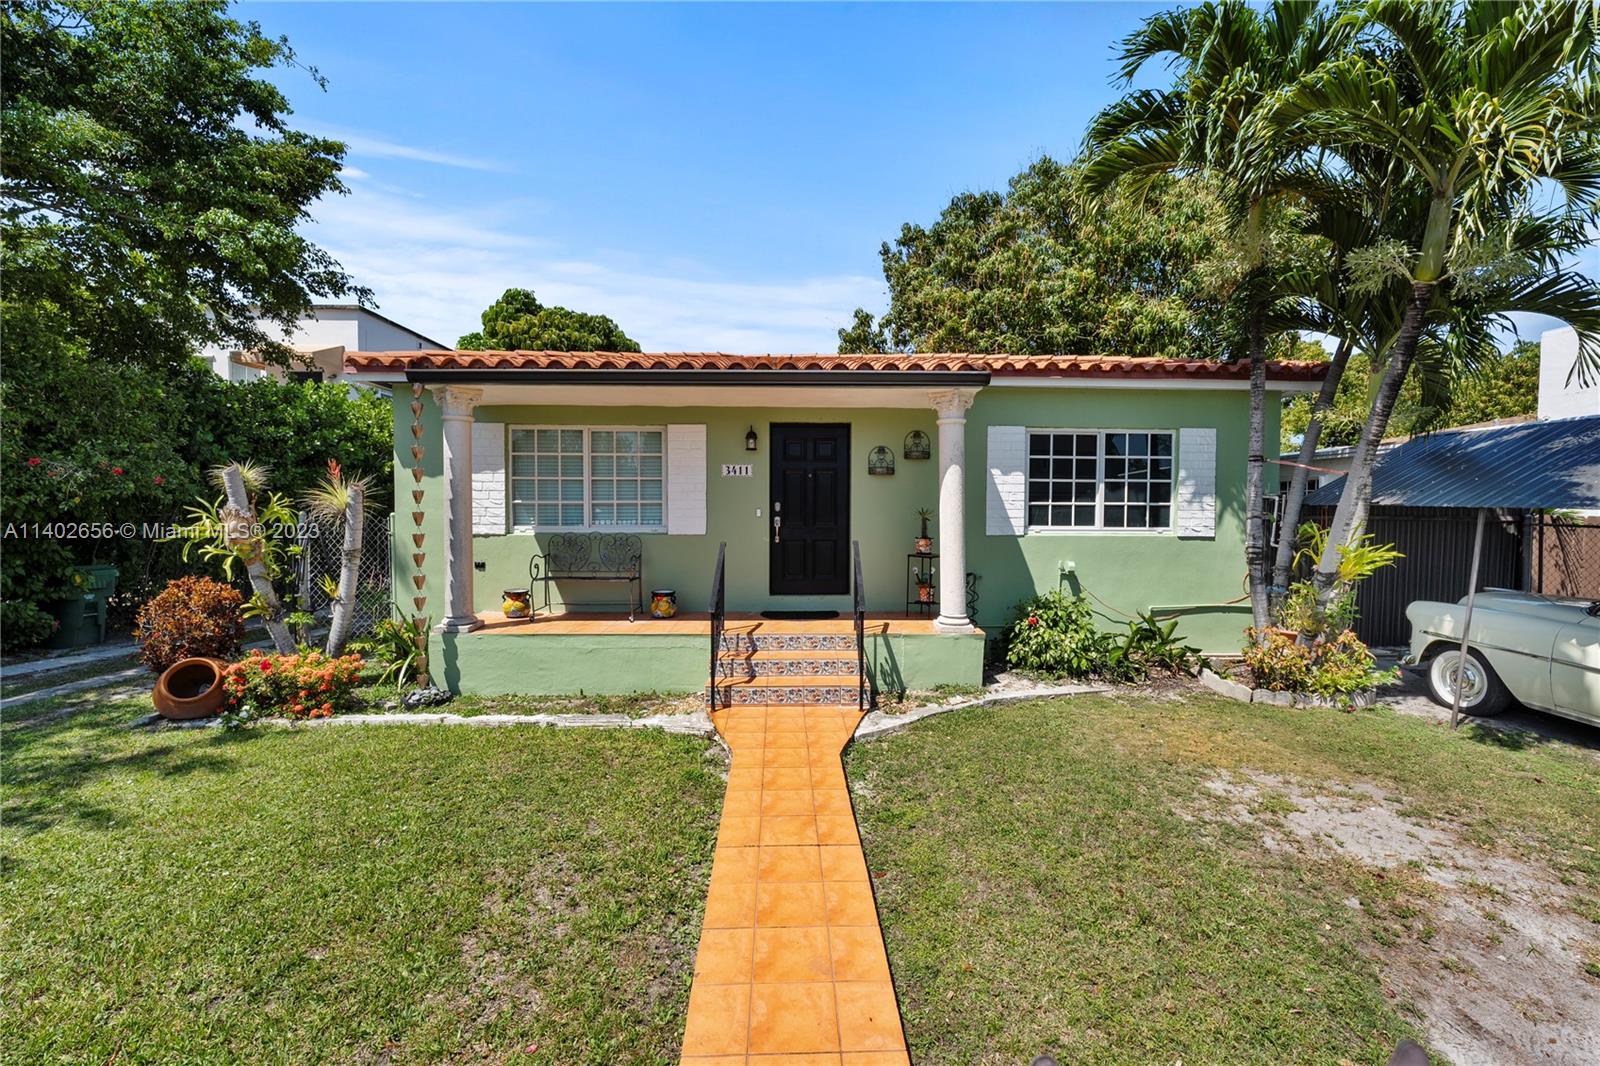 Gorgeous 2/2 home with 1/1 in-laws quarters in the heart of Miami. The 2/1 original home features hardwood floors, SS appliances, a laundry room and a spectacular yard with outdoor full bathroom, space for pool, boat or RV, and summer kitchen. This home had the electricity and plumbing re-done in 1999,  The newer built in-laws quarter (with permit) features a spacious 1/1 tiled throughout, its own AC and water heater. Property only has 1 meter. Perfect home for an investor, large family, or family who is looking to generate additional income. This home is close to downtown Miami, coral gables, the beach, shopping, great restaurants and excellent schools.